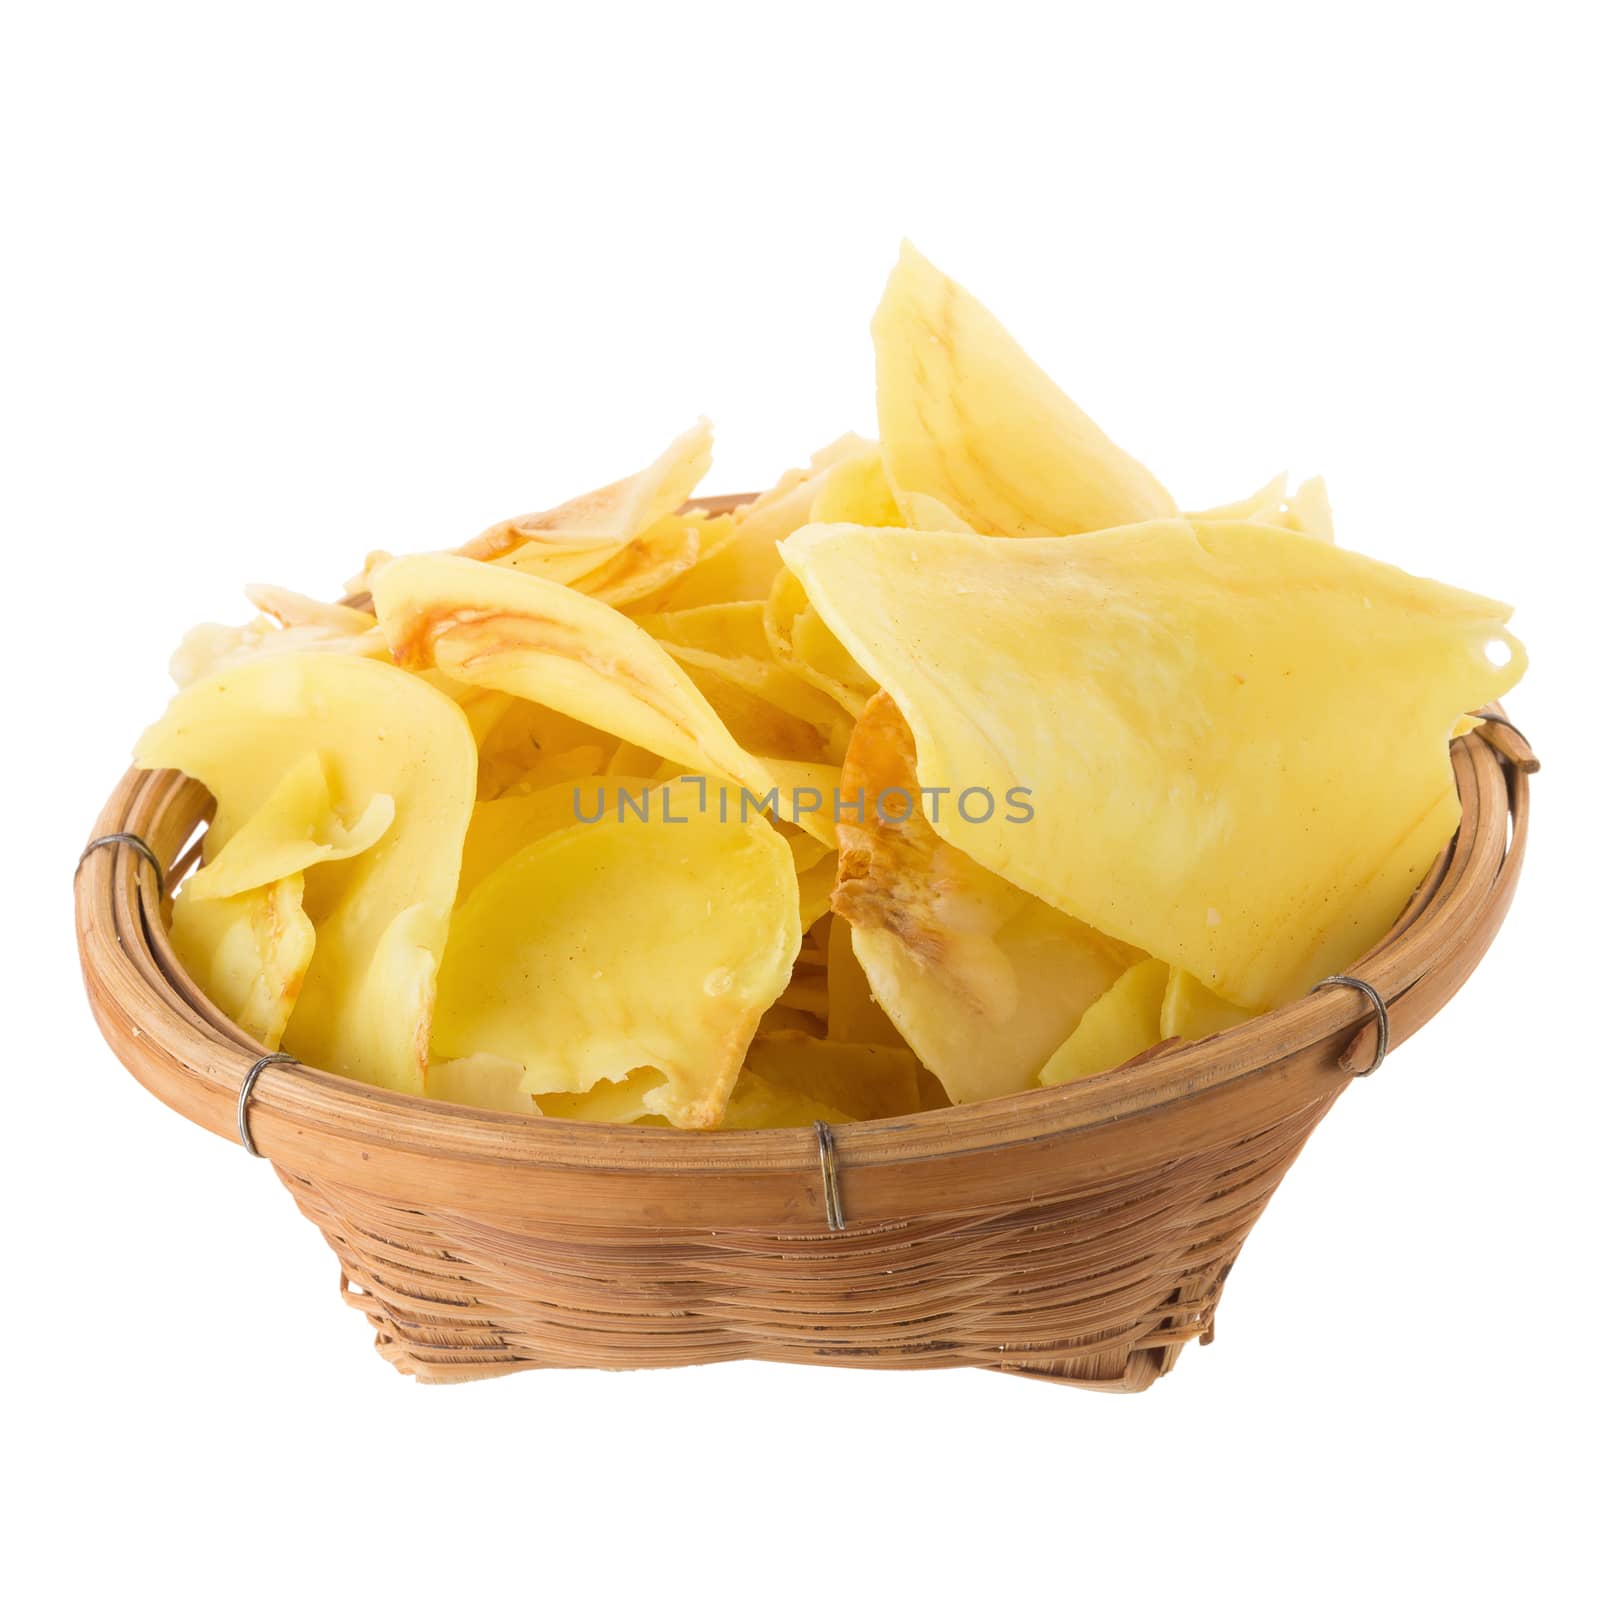 Durian chips fried snack fruit In the basket, Durian crispy frui by kaiskynet